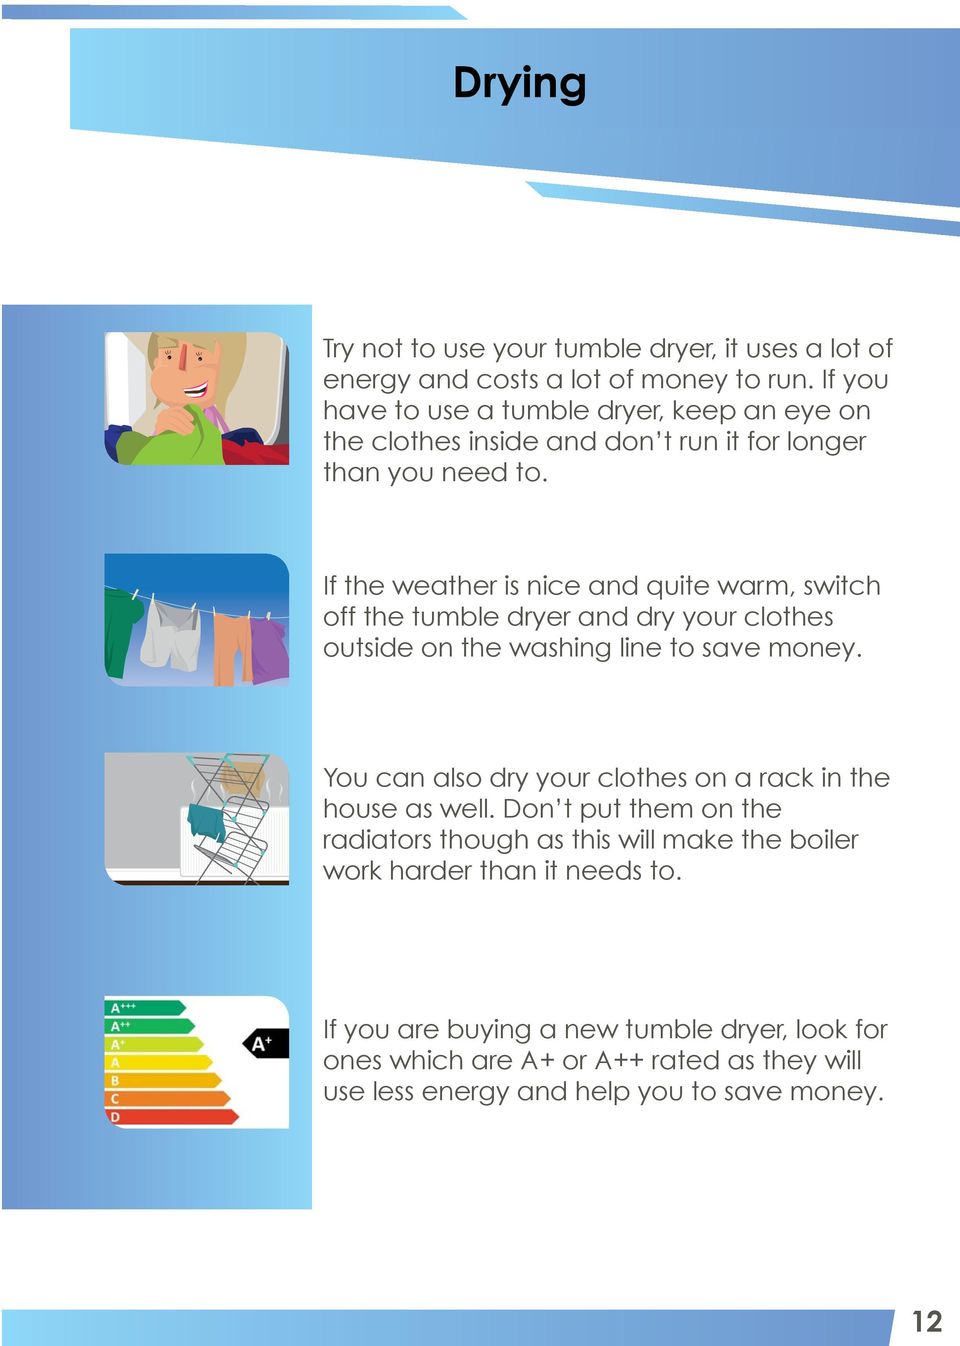 If the weather is nice and quite warm, switch off the tumble dryer and dry your clothes outside on the washing line to save money.